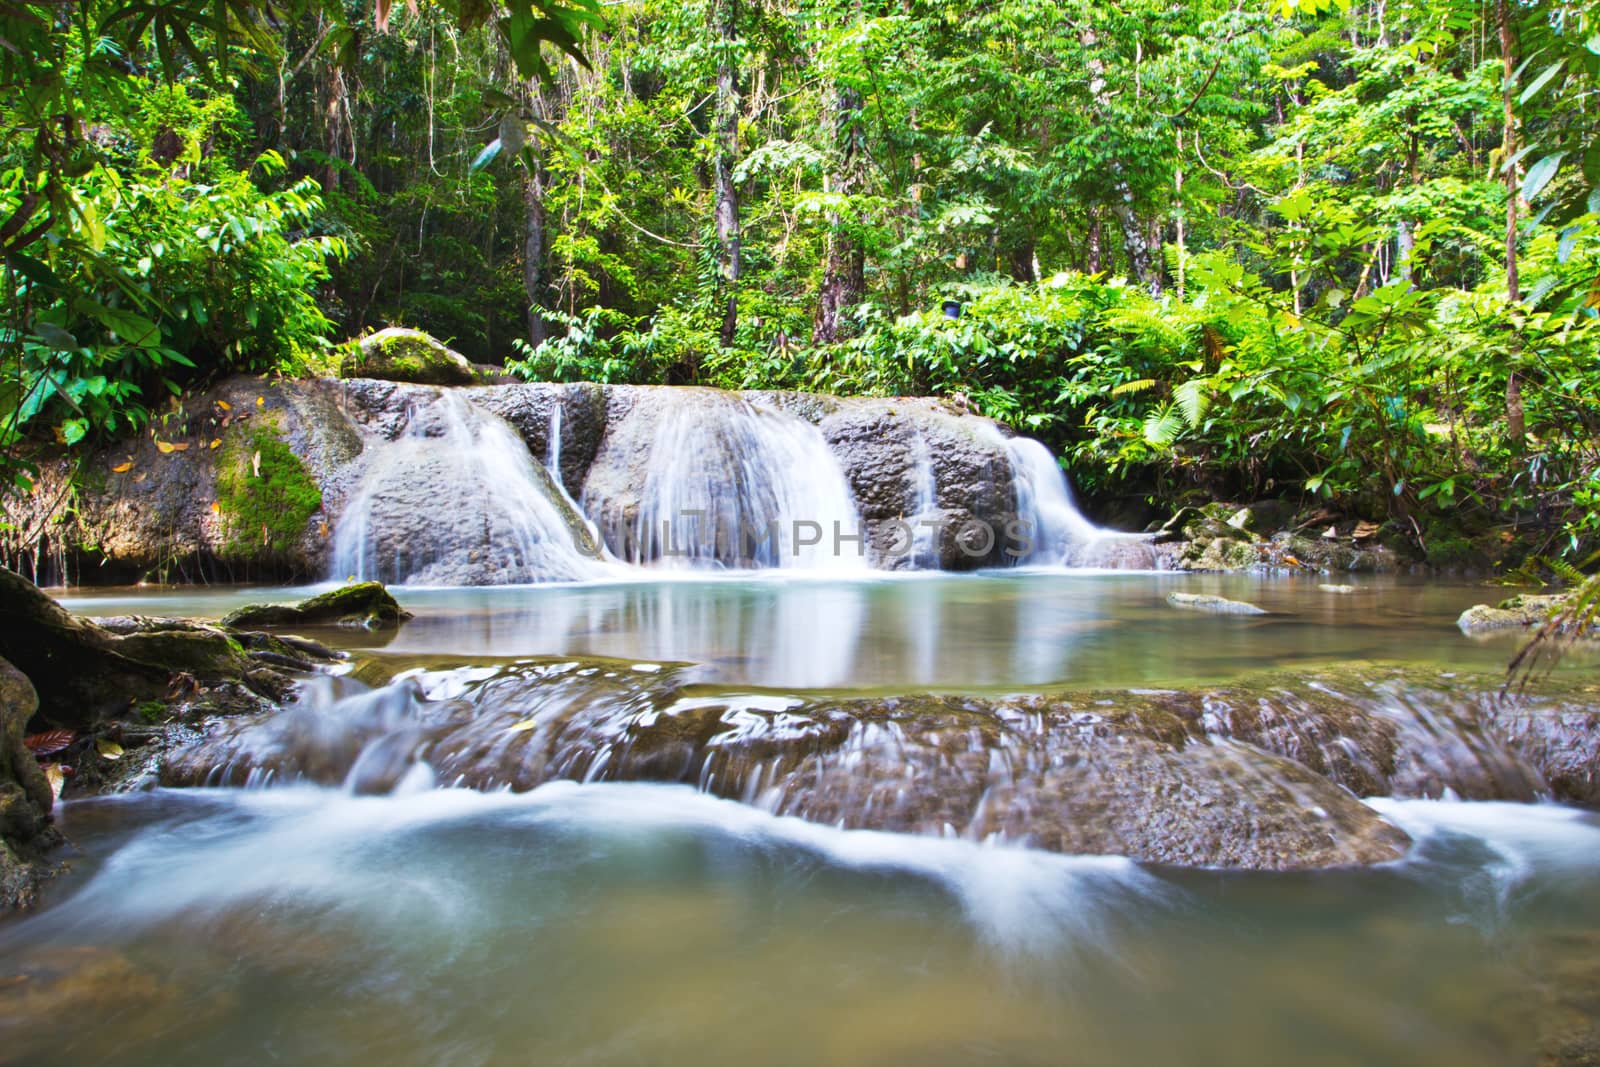 Waterfall in forest by wyoosumran